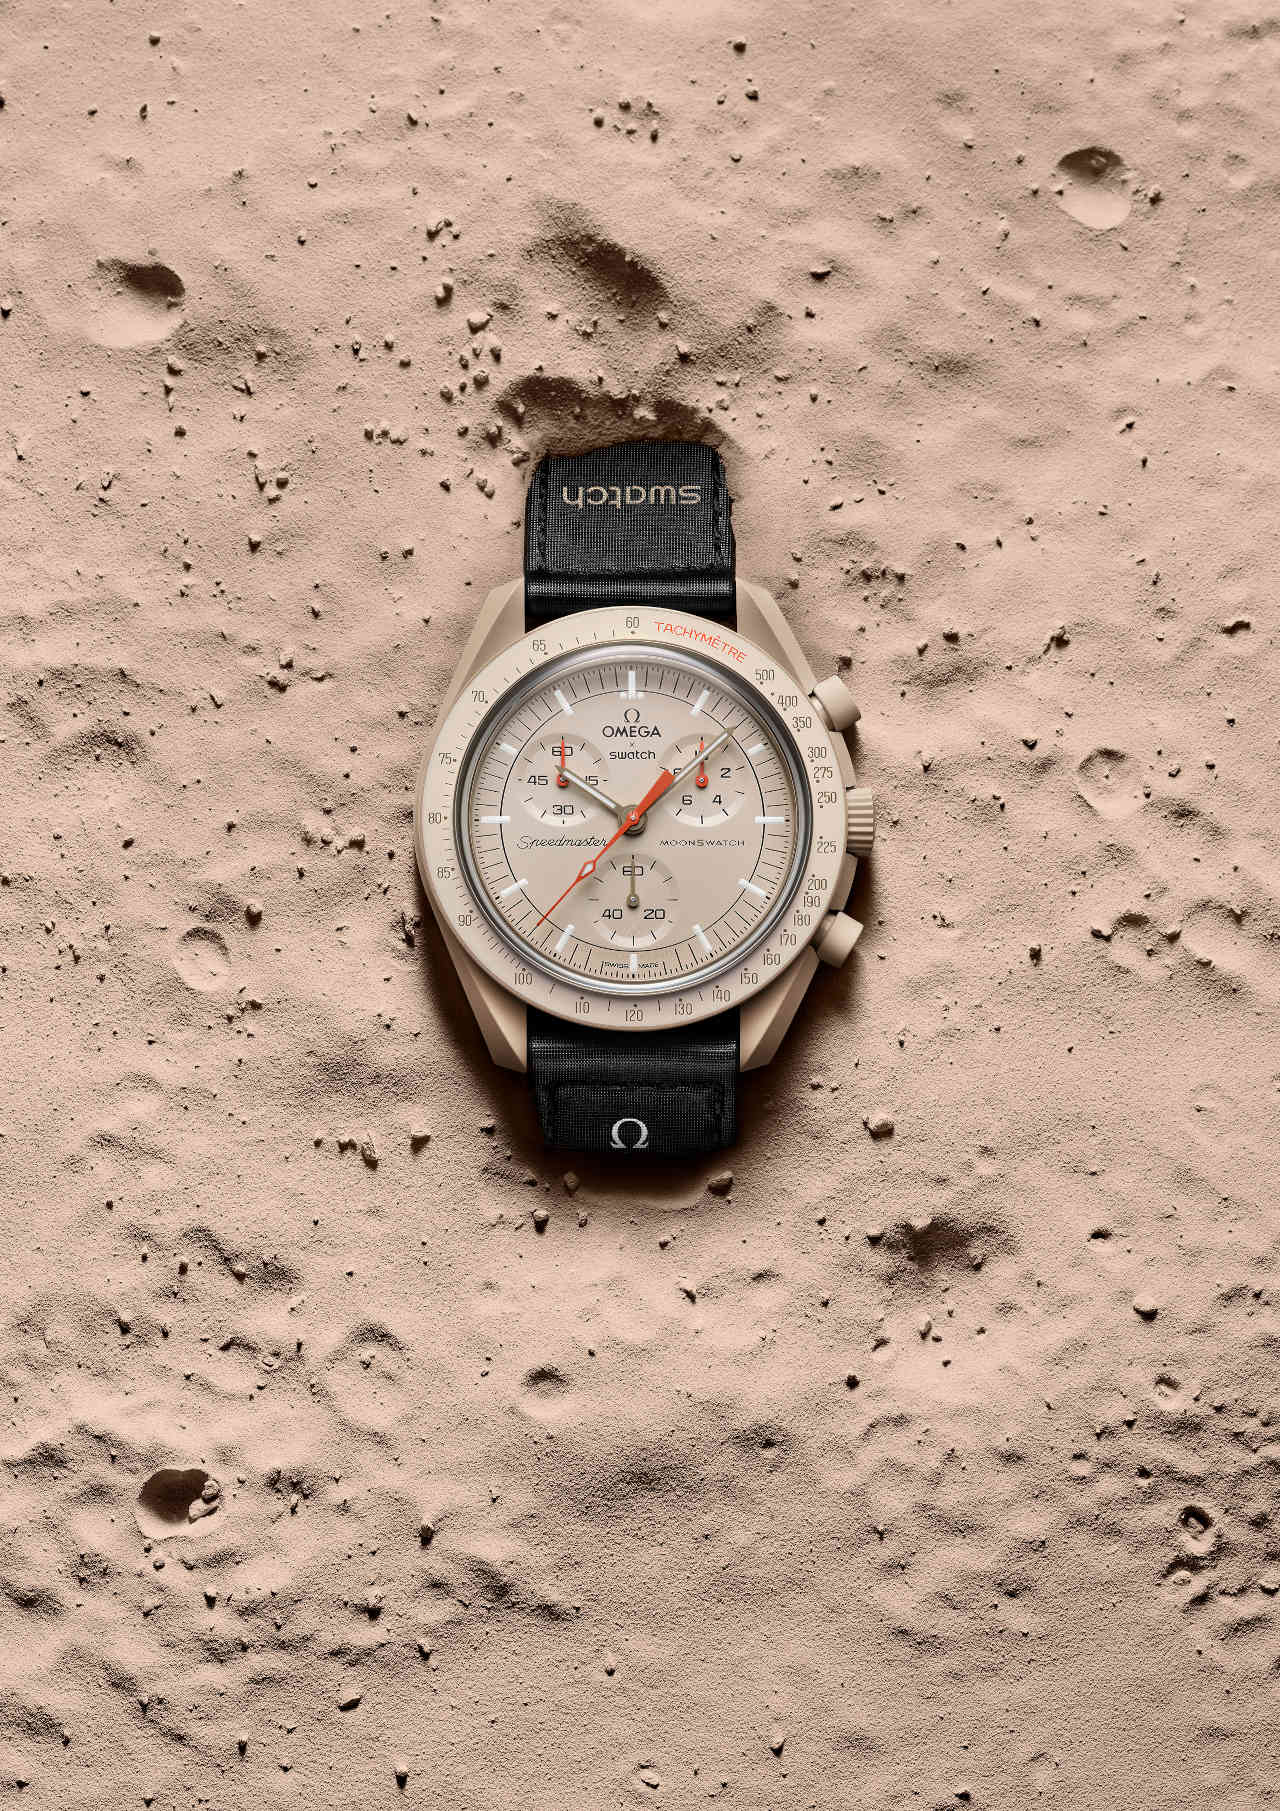 Joint mission: Omega joins up with Swatch with the launch of 